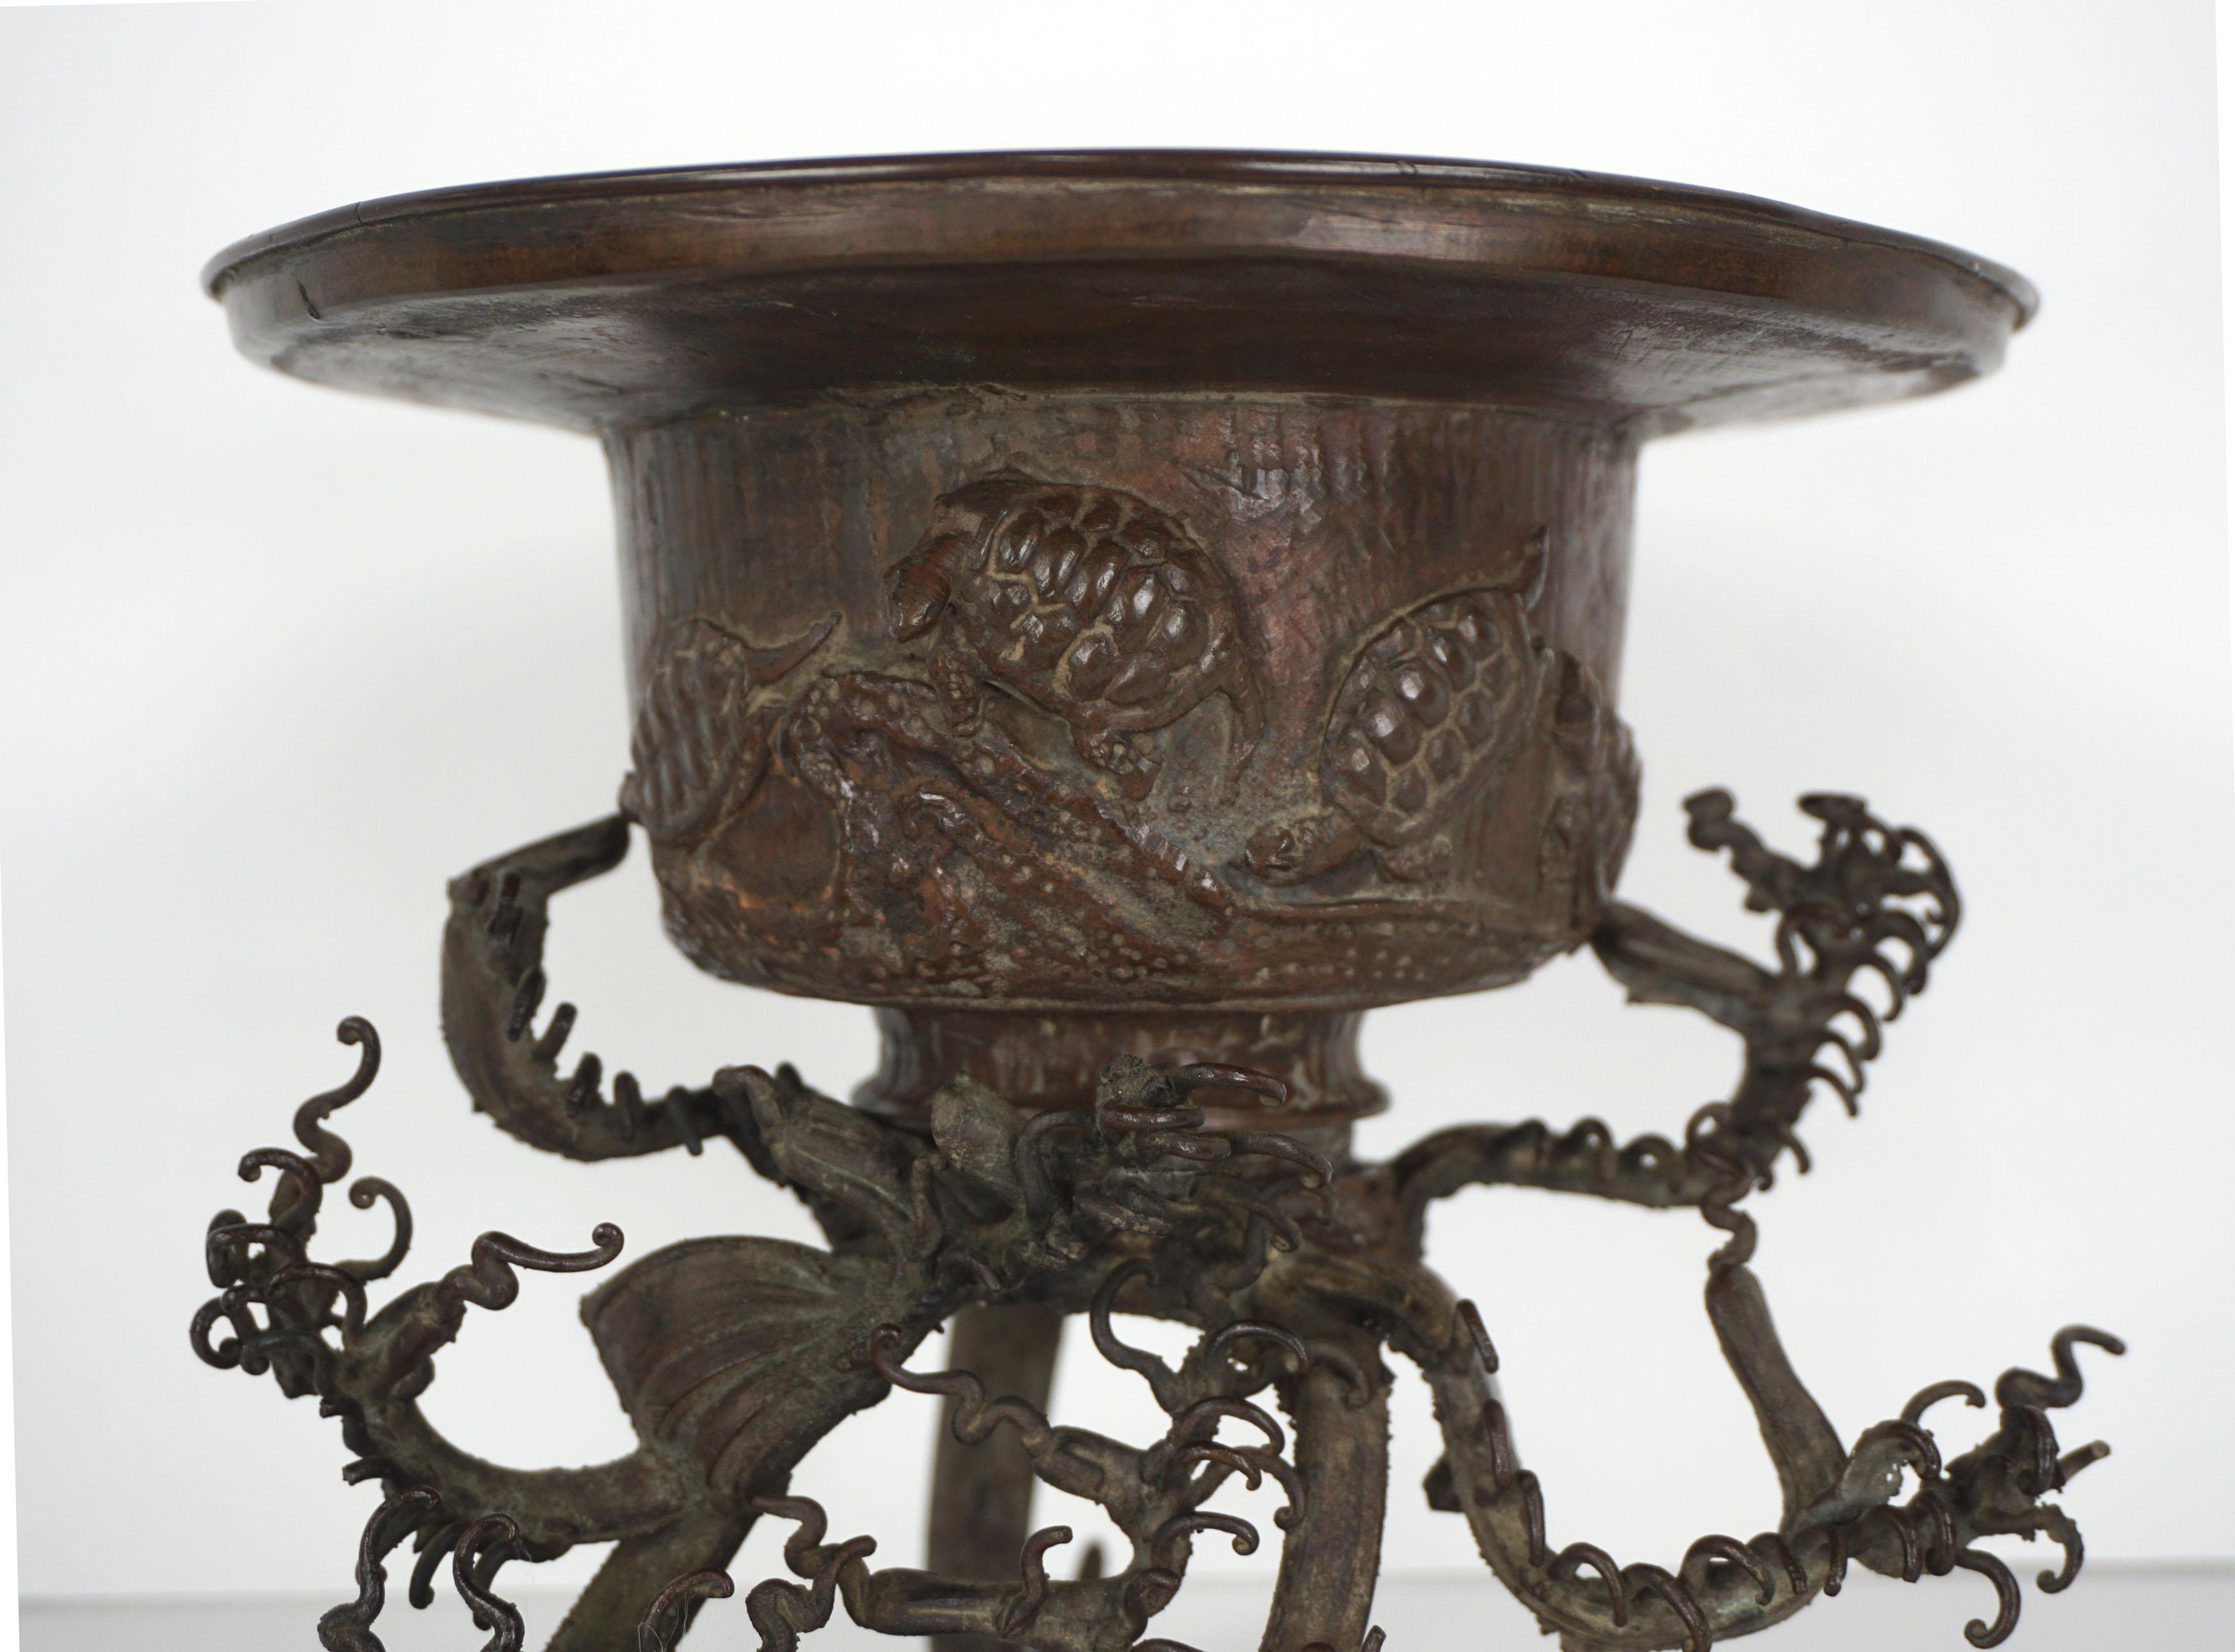 Beautiful two-piece Japanese bronze usubata, a vessel for ikebana flower arranging, with intricate wave form base, Meiji period, late 19th century, Japan. The usubata vessel has four charming turtles and sets on a separately cast base designed as